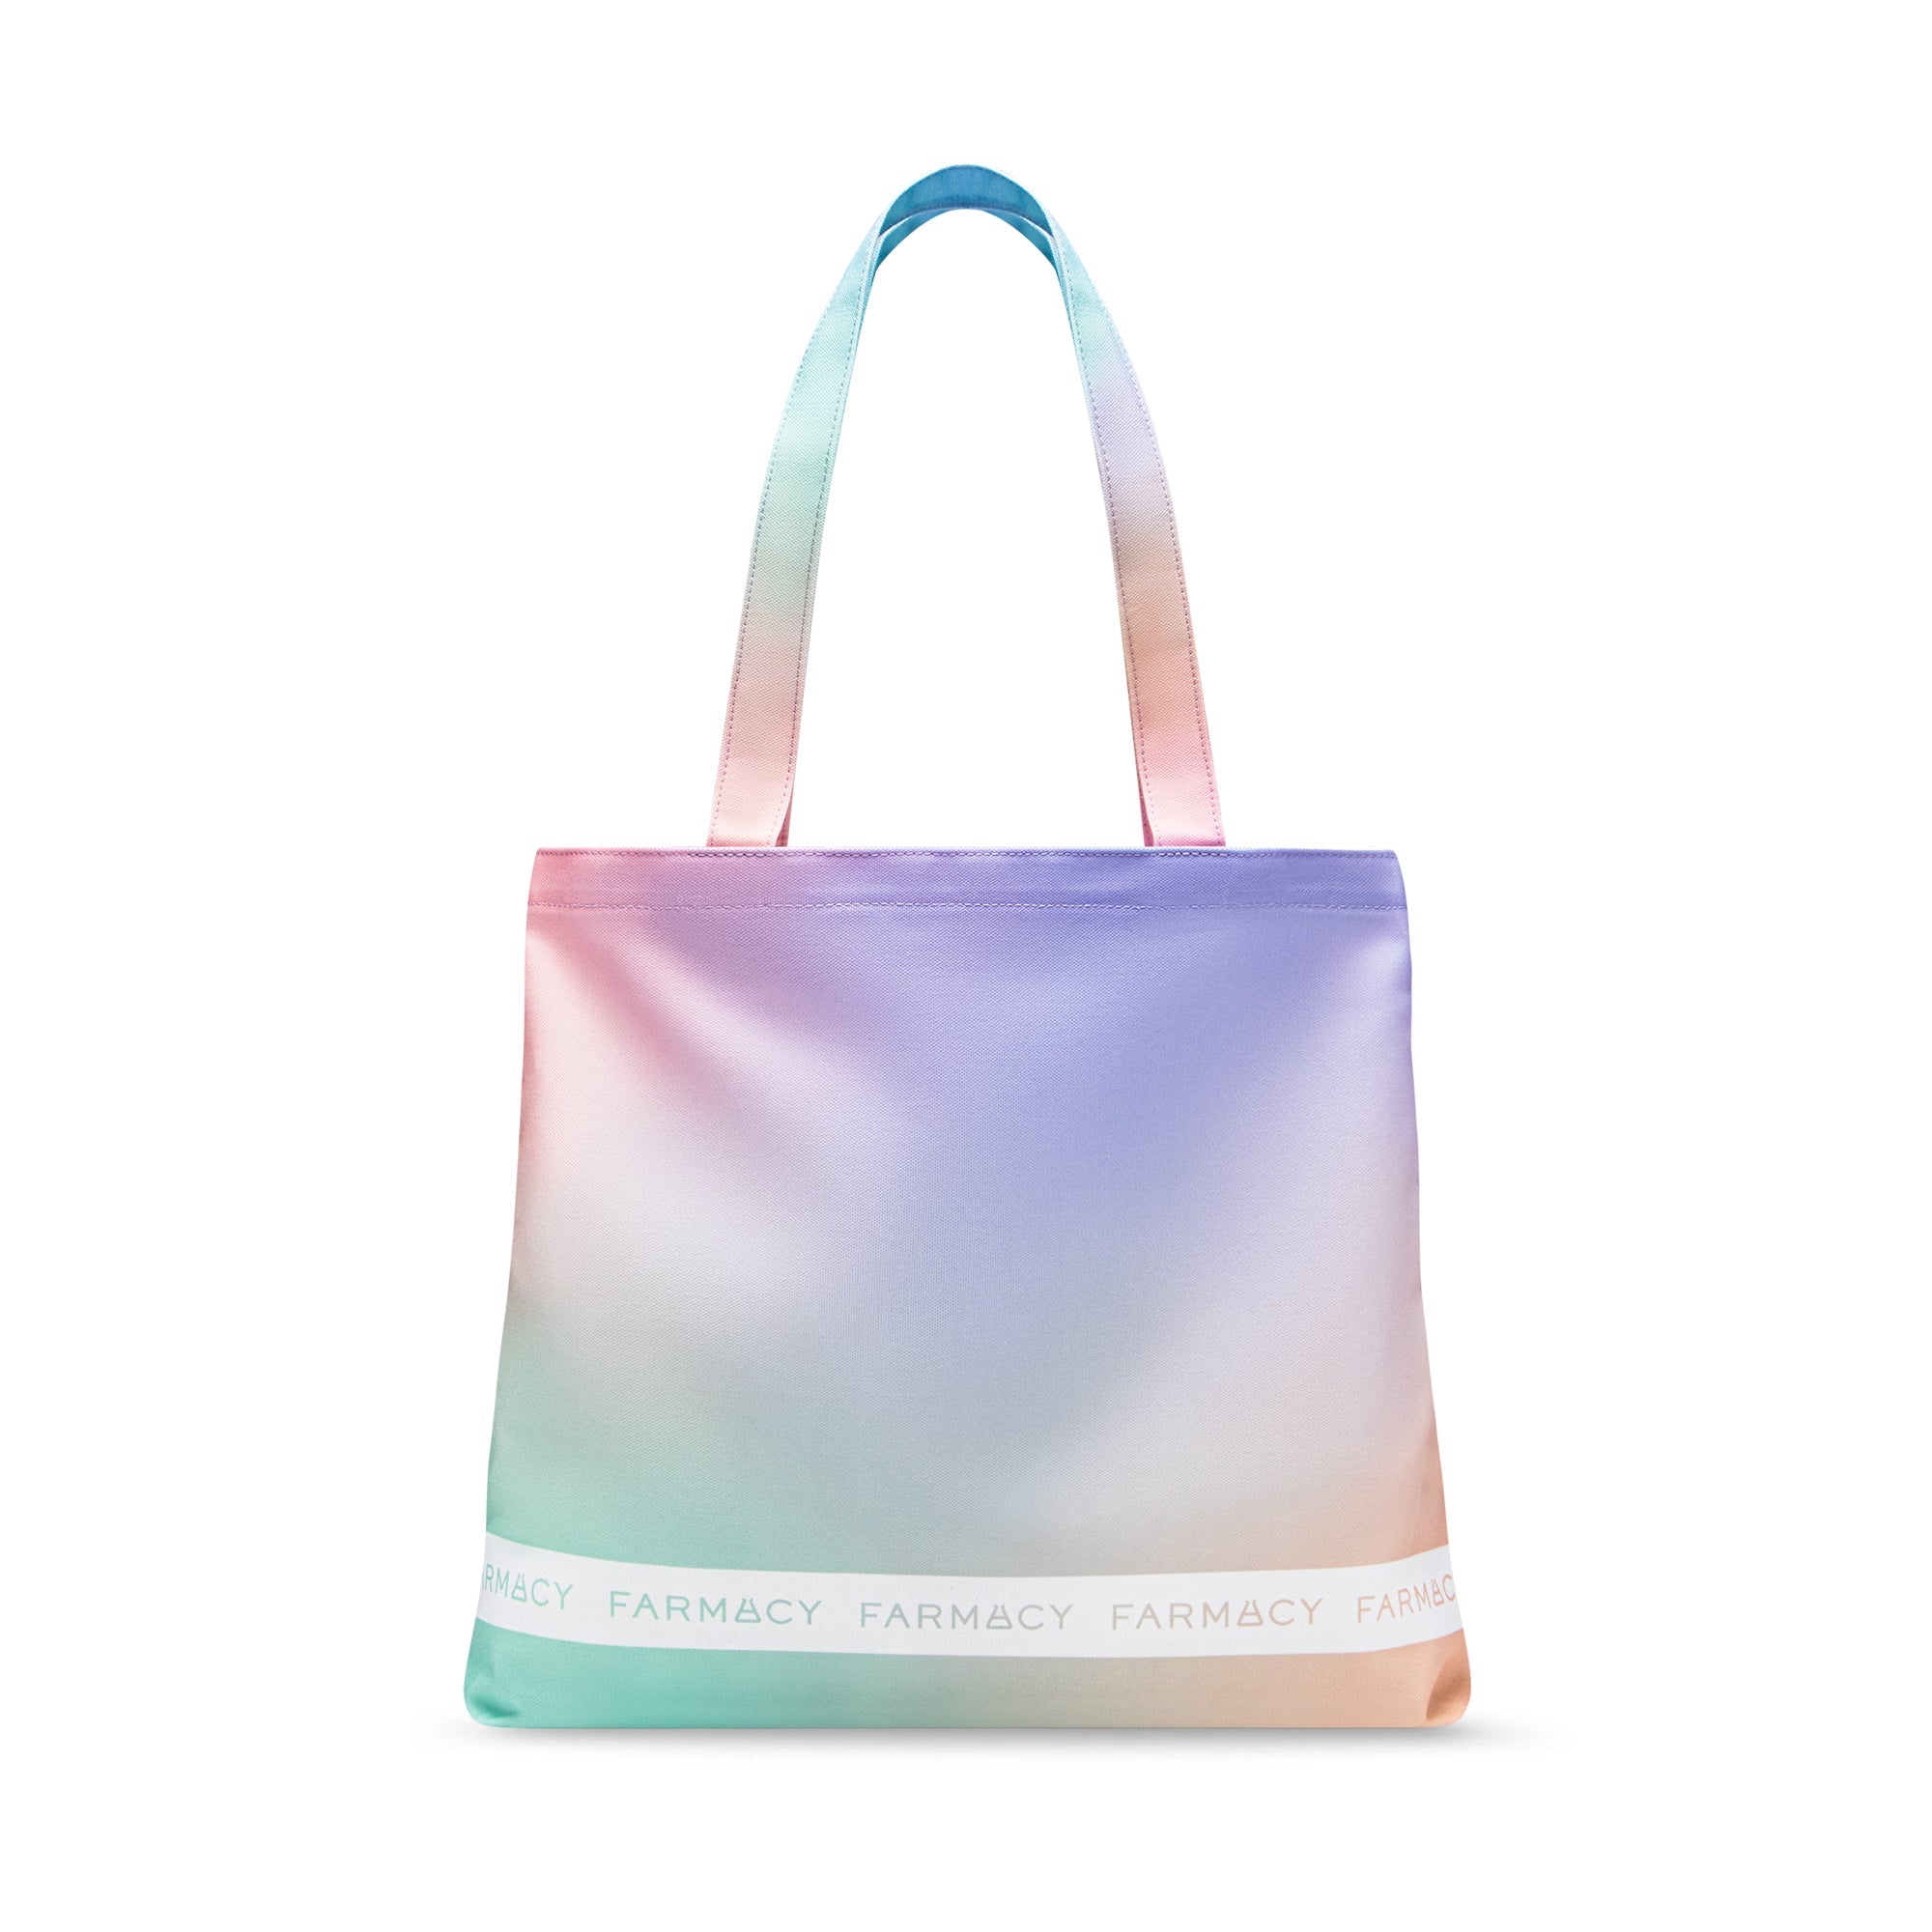 FREE EVERYWHERE CANVAS TOTE